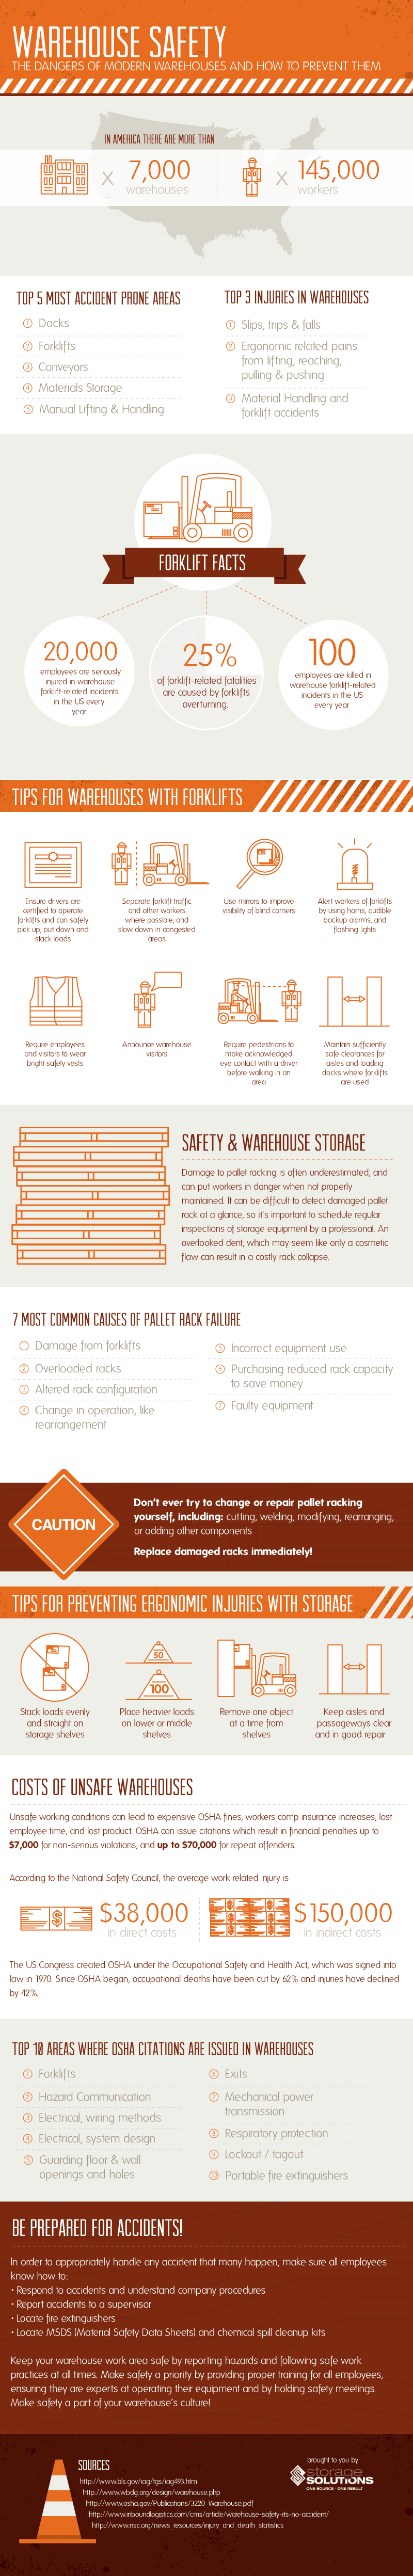 Warehouse Safety Infographic